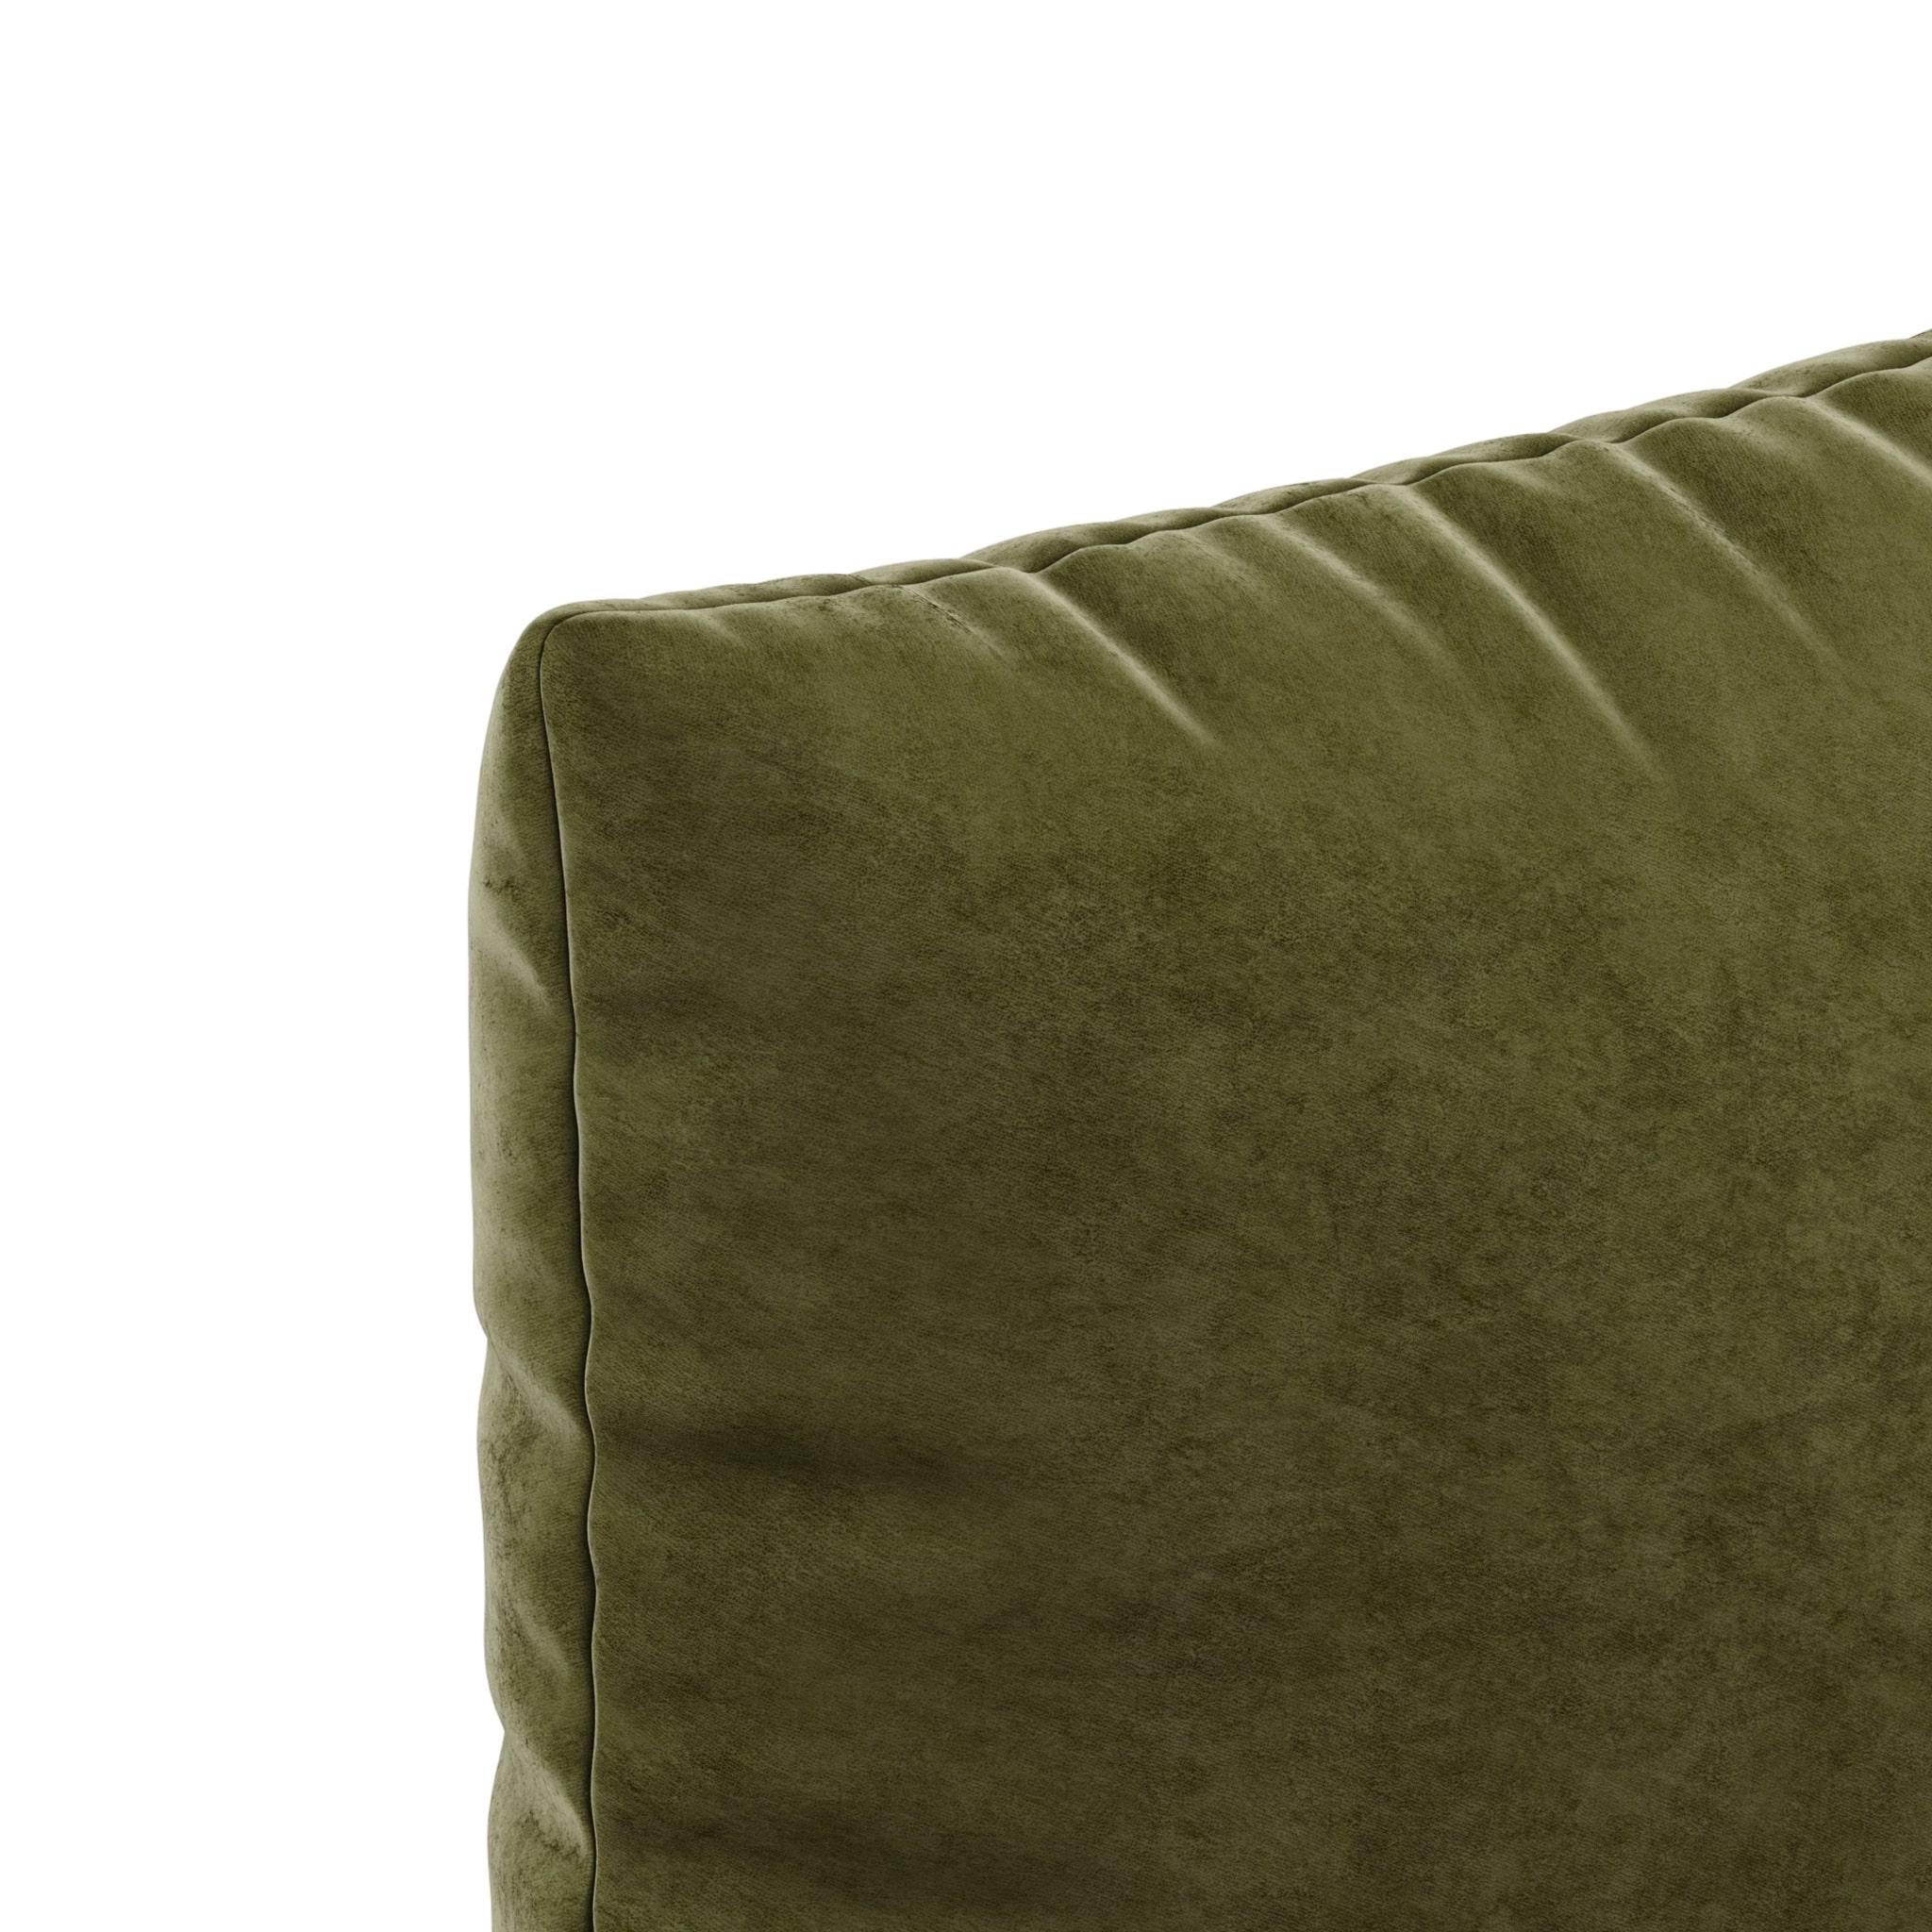 Forest velvet cushion is a square green pillow with a delicate touch. The green tone combined with the soft texture will take you to somewhere else. Somewhere outdoors, with a fresh breeze and forest smells. It is the comfort piece that is missing